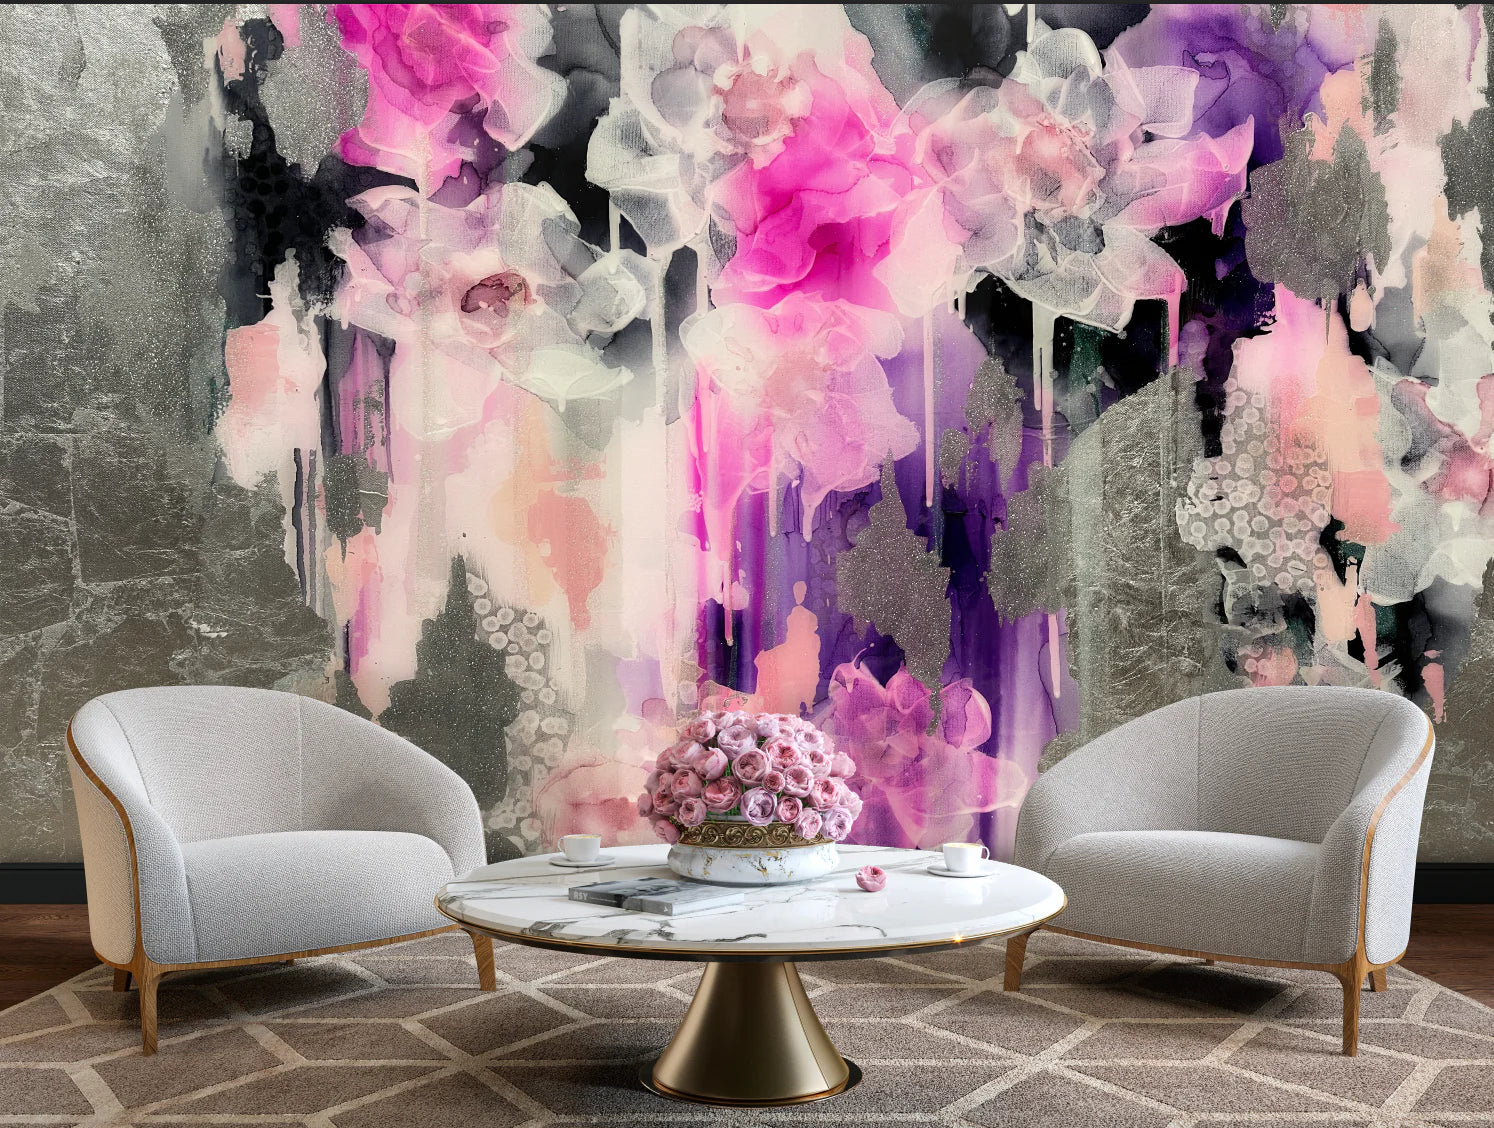 Tea Party Wall Mural 9 Tall X 10 Wide Nursery  Etsy  Floral print  wallpaper Large floral wallpaper Wall murals